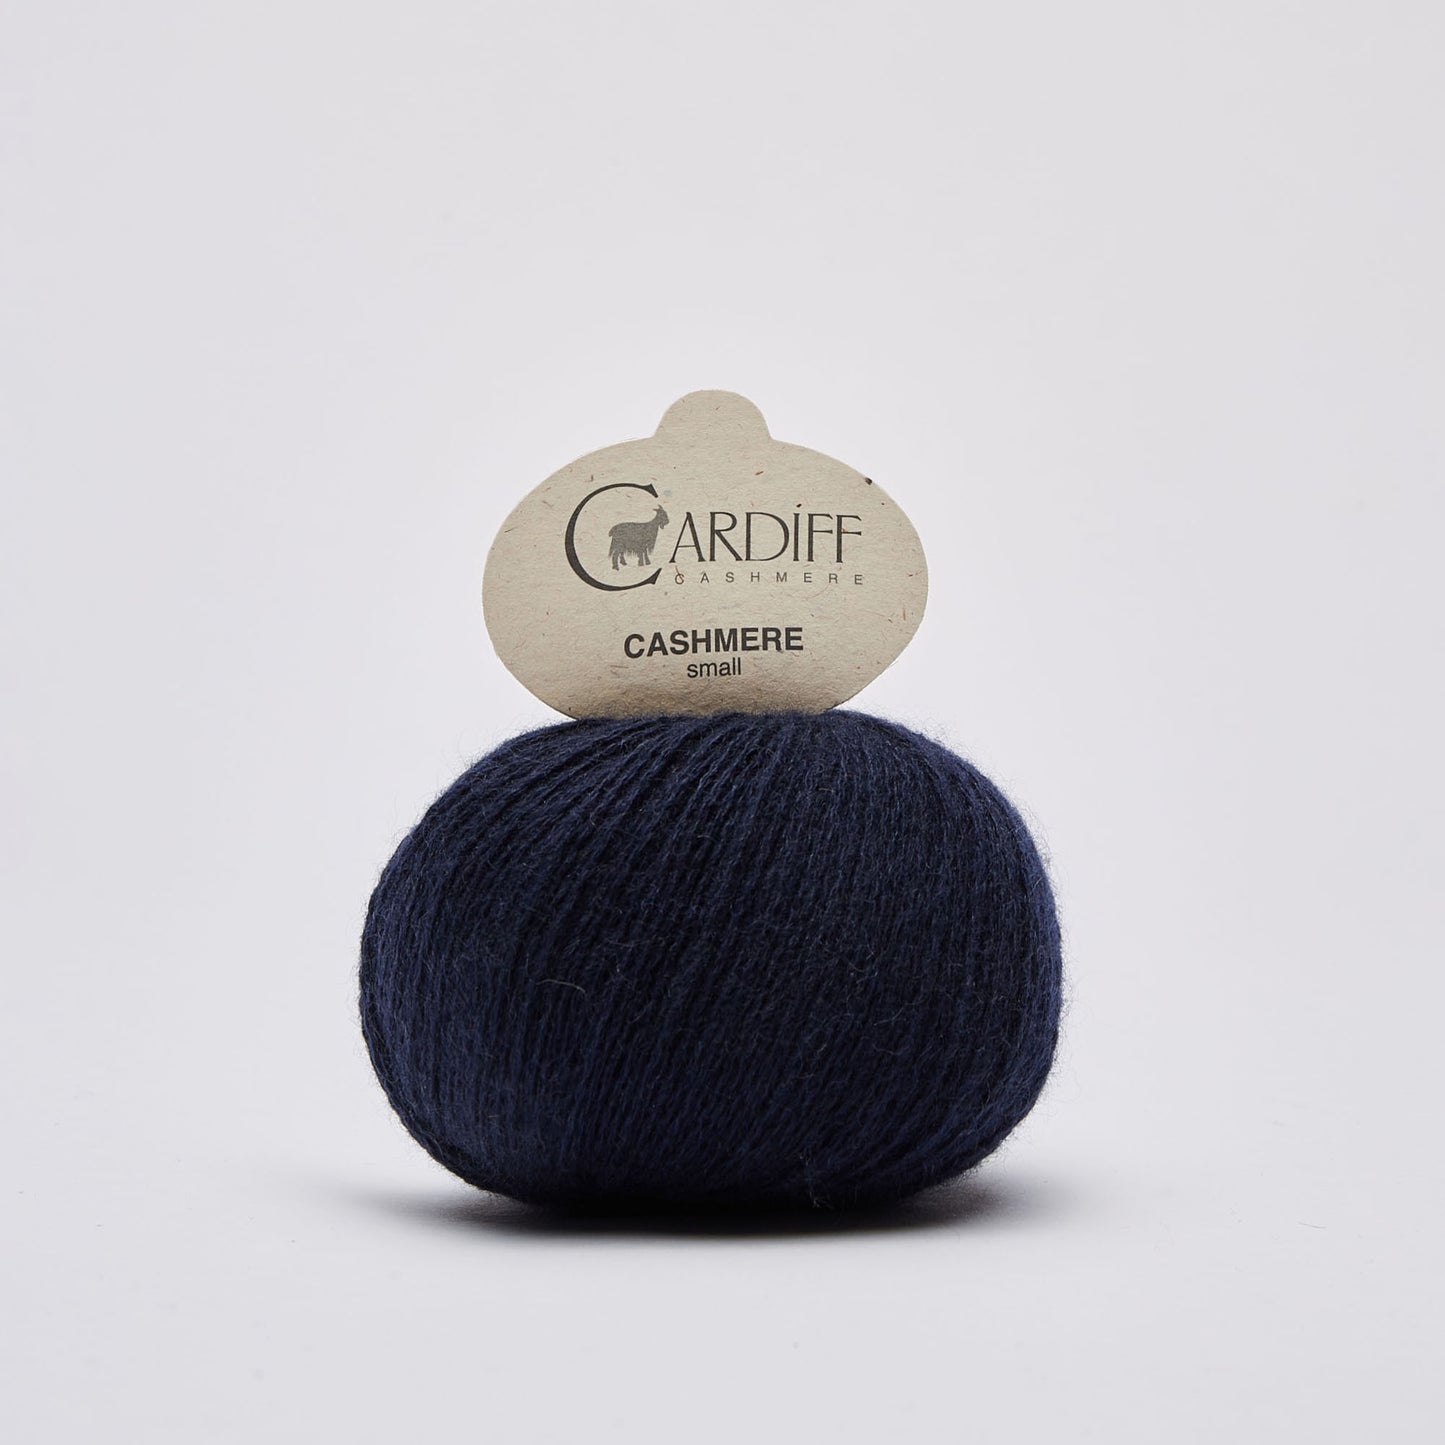 Cardiff SMALL gentle yarn, 647, COSMO, comp: 100% Cashmere